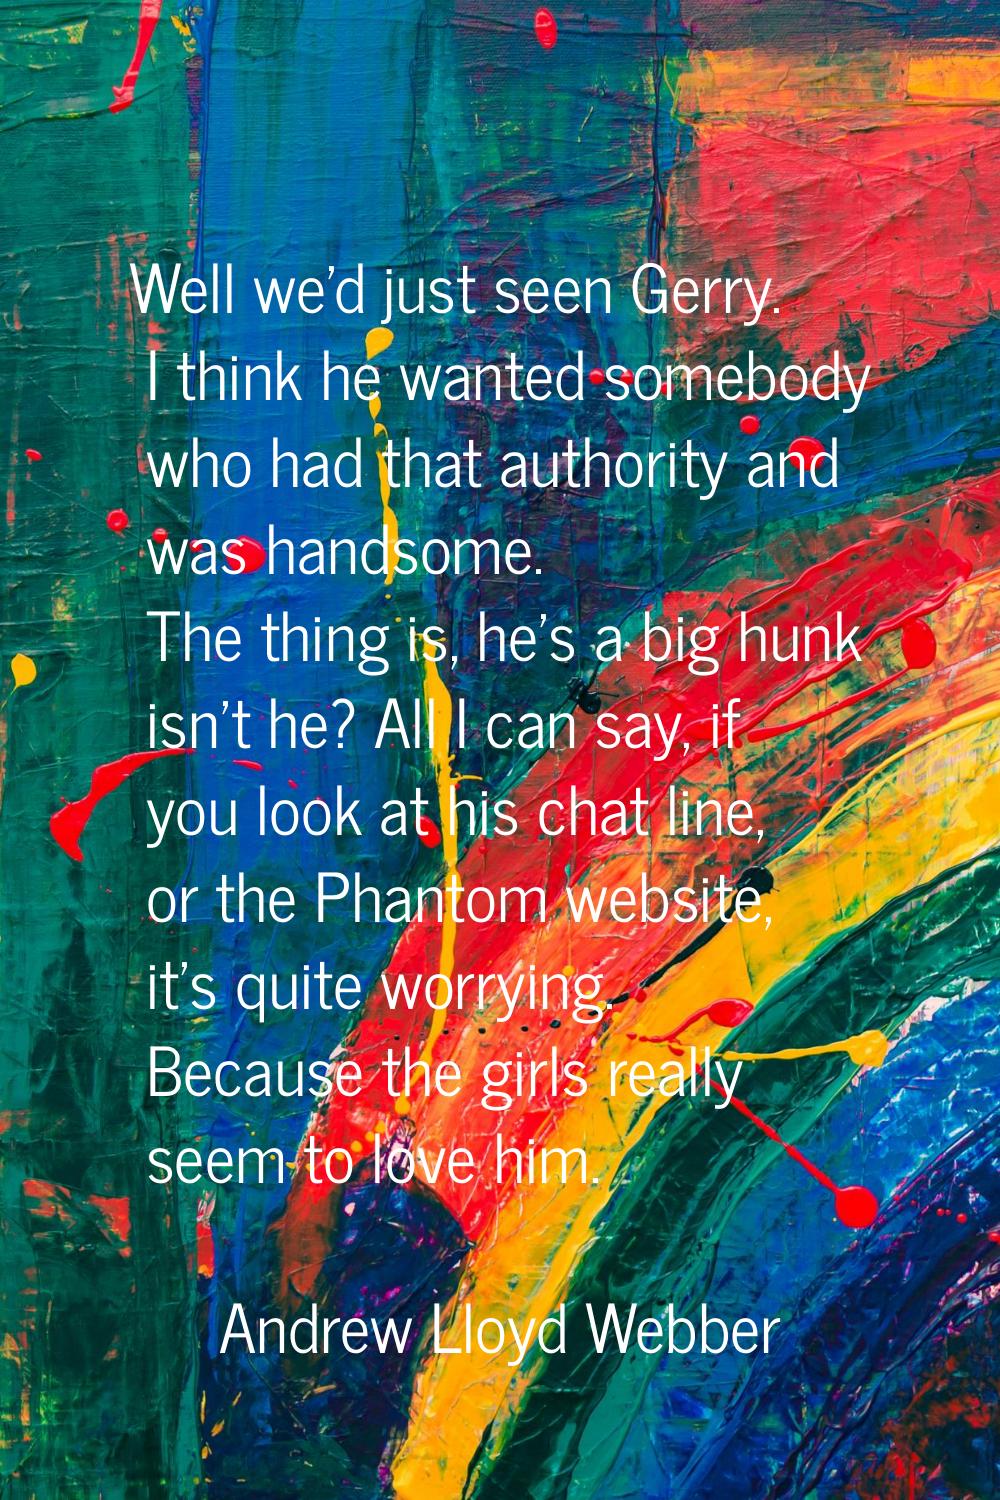 Well we'd just seen Gerry. I think he wanted somebody who had that authority and was handsome. The 